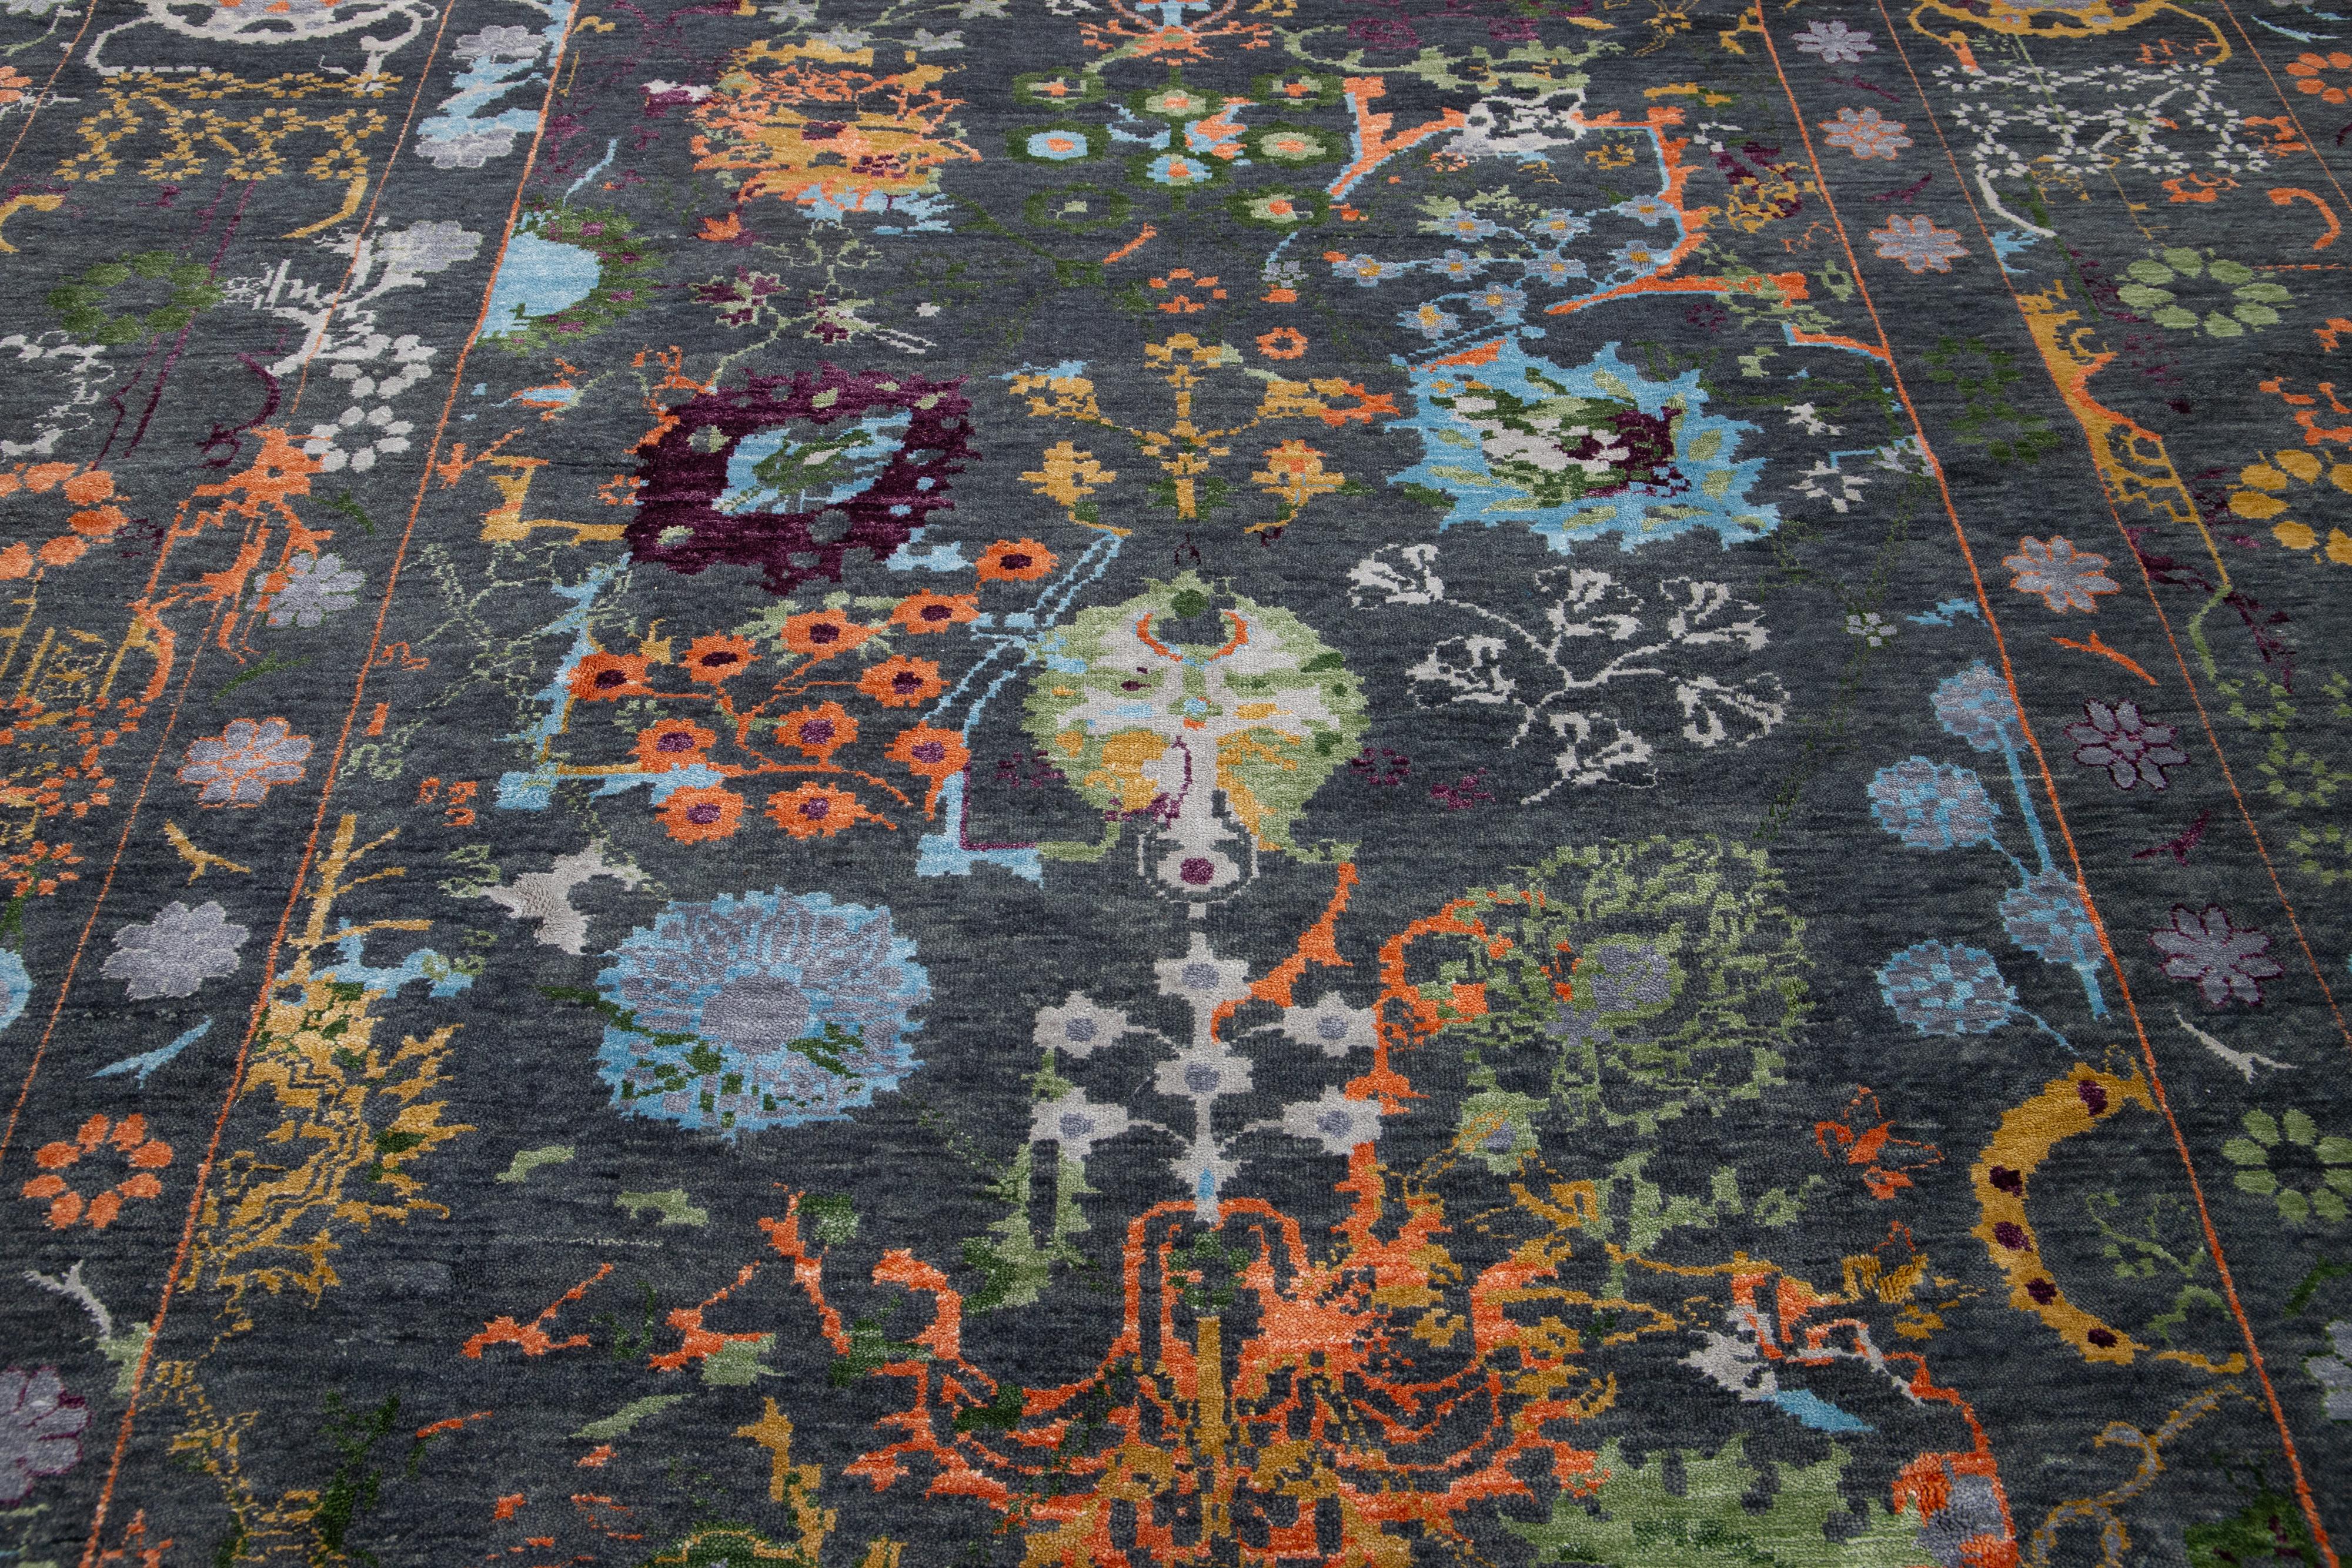  Contemporary Transitional Handmade Wool Rug with Floral Motif In Charcoal   In New Condition For Sale In Norwalk, CT